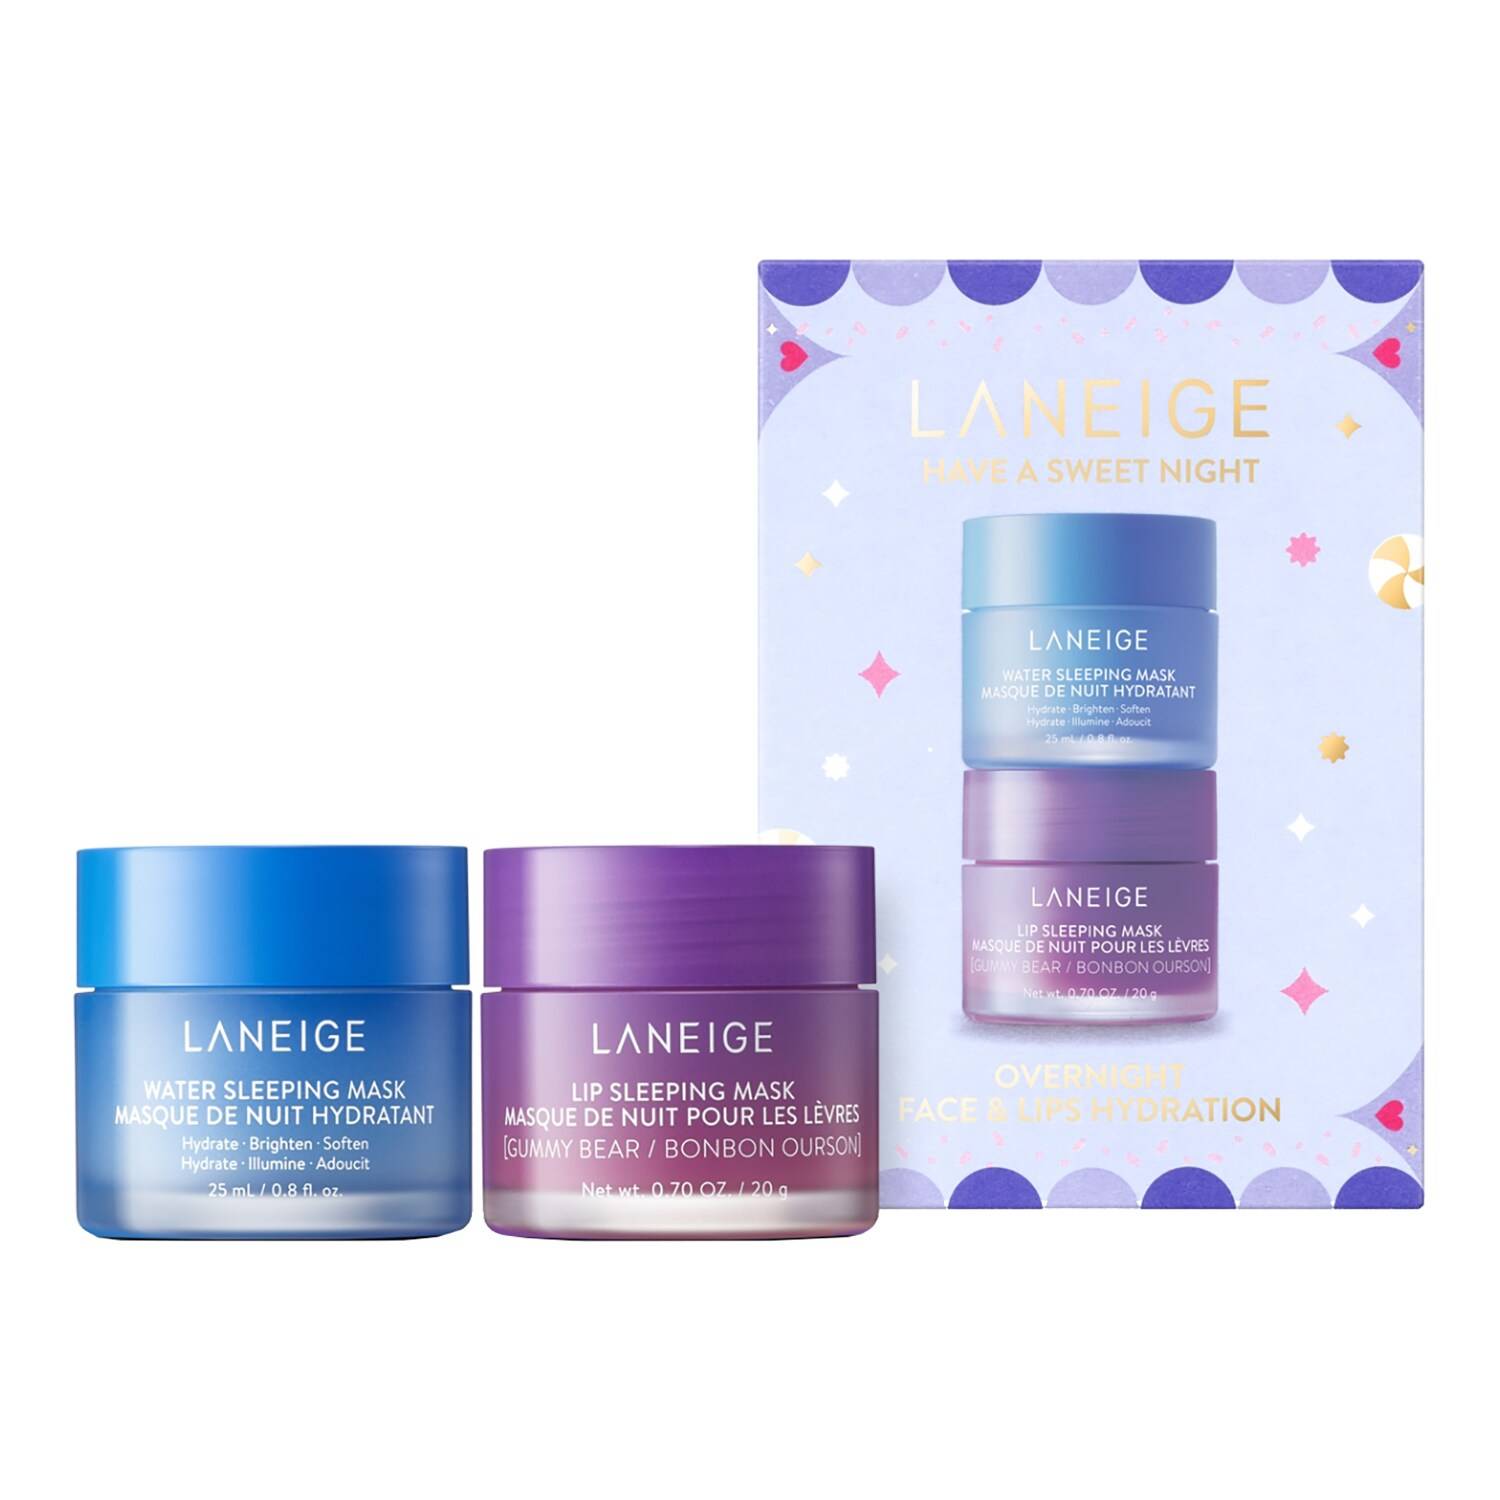 LANEIGE Have a Sweet Night Set